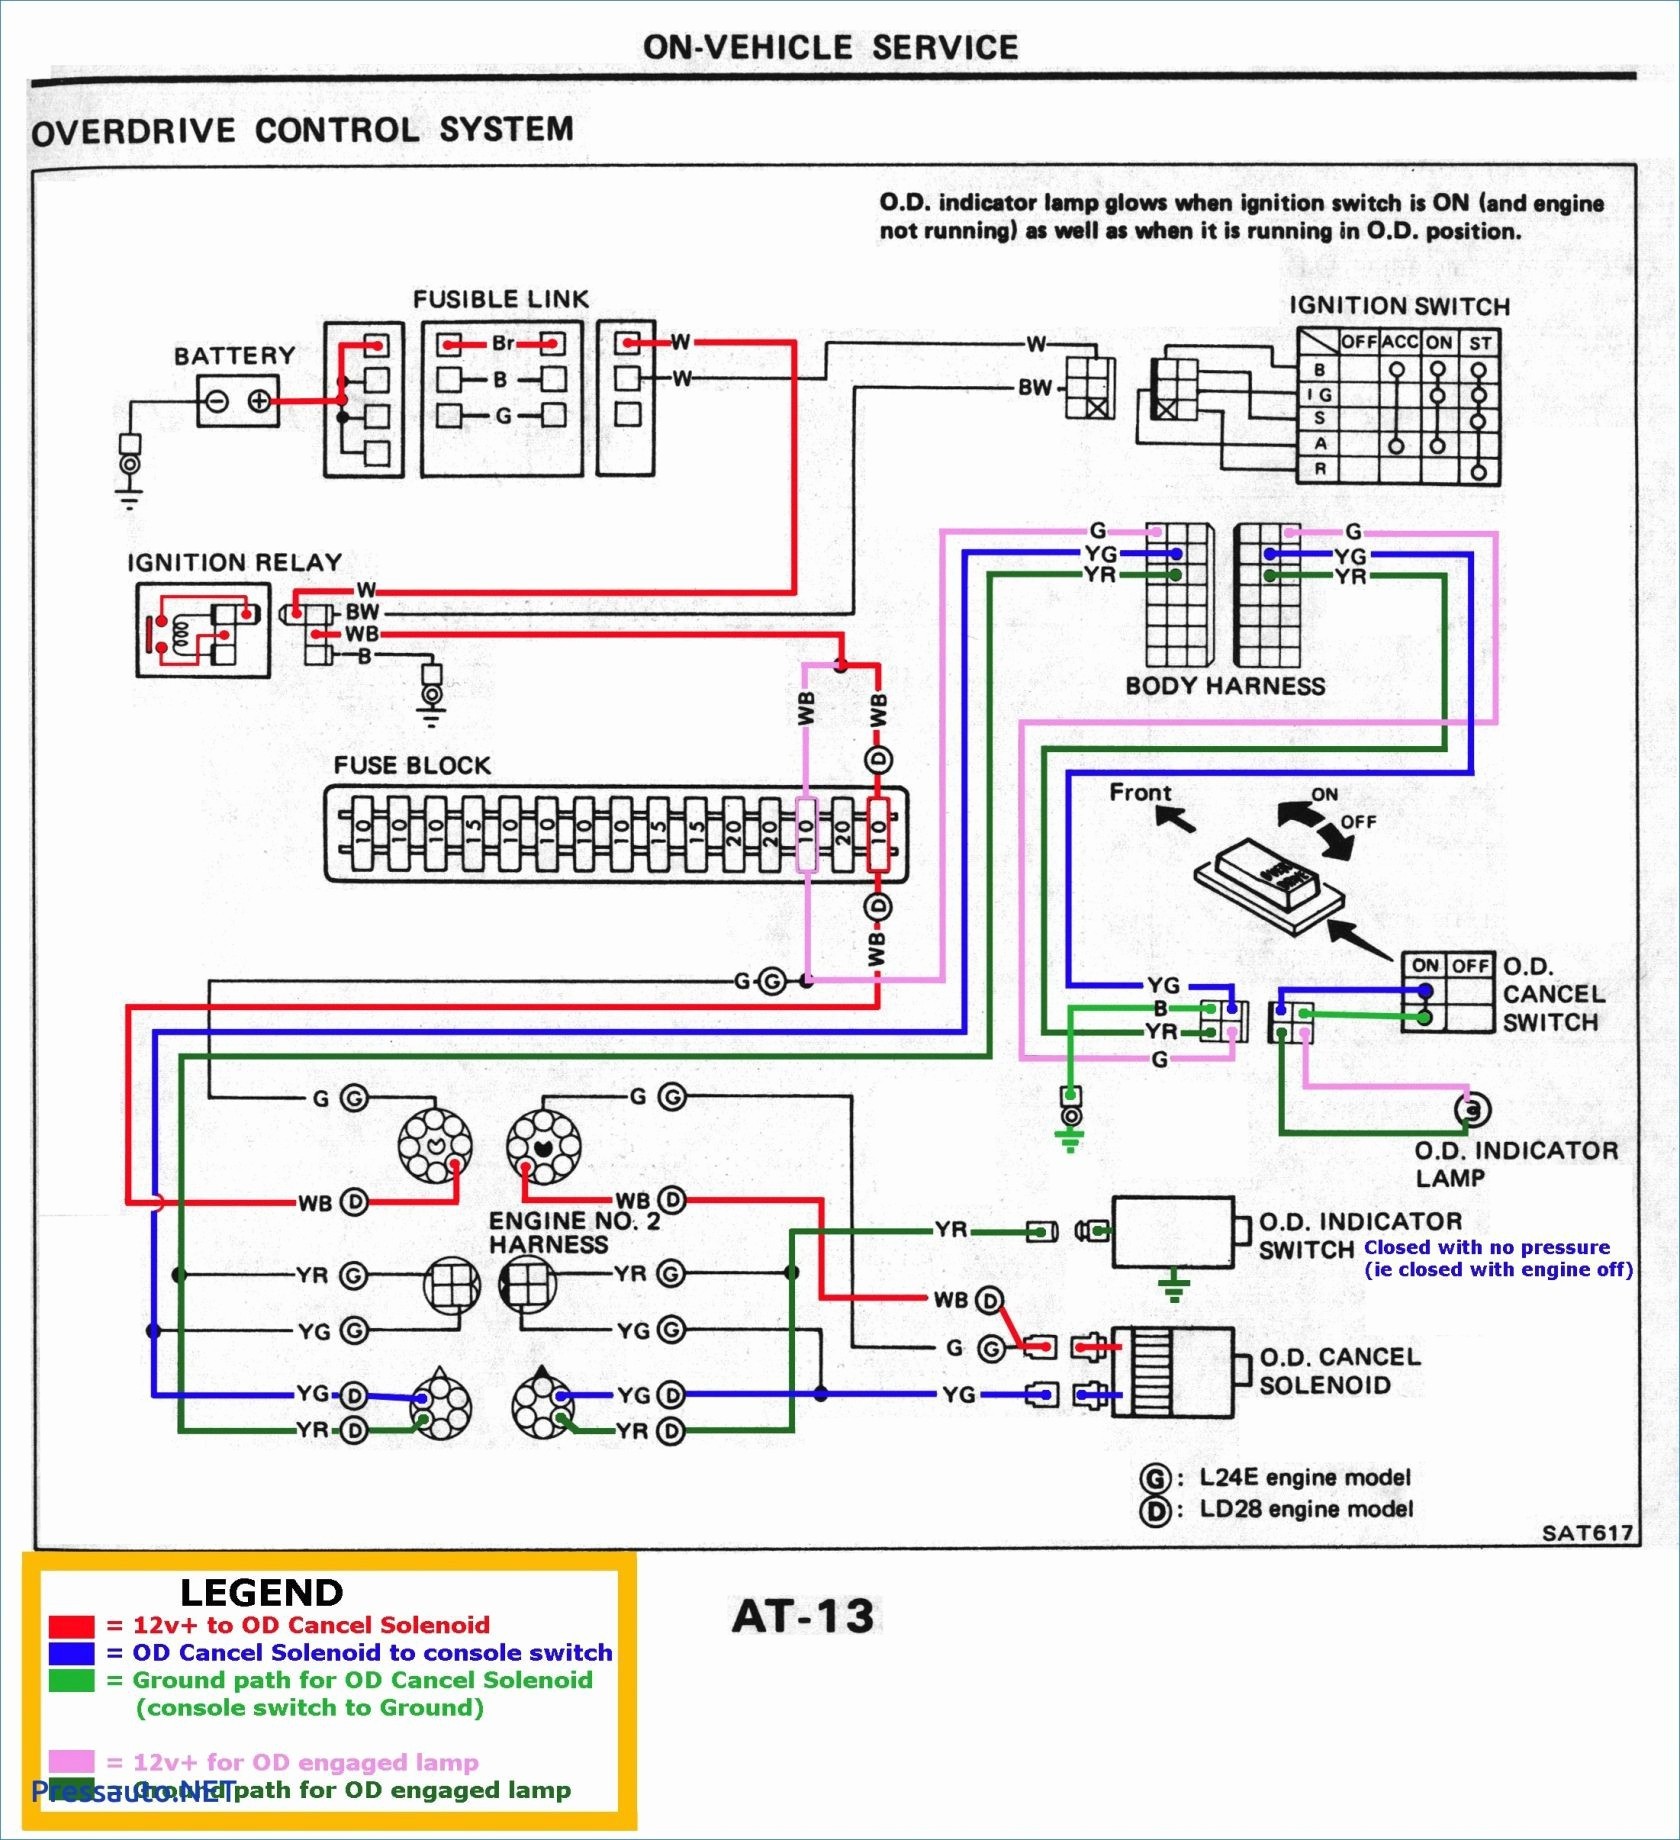 Wiring Diagram For A Craftsman Riding Mower Inspirational Wiring Diagram For Yardman Riding Mower Refrence Wiring Diagram